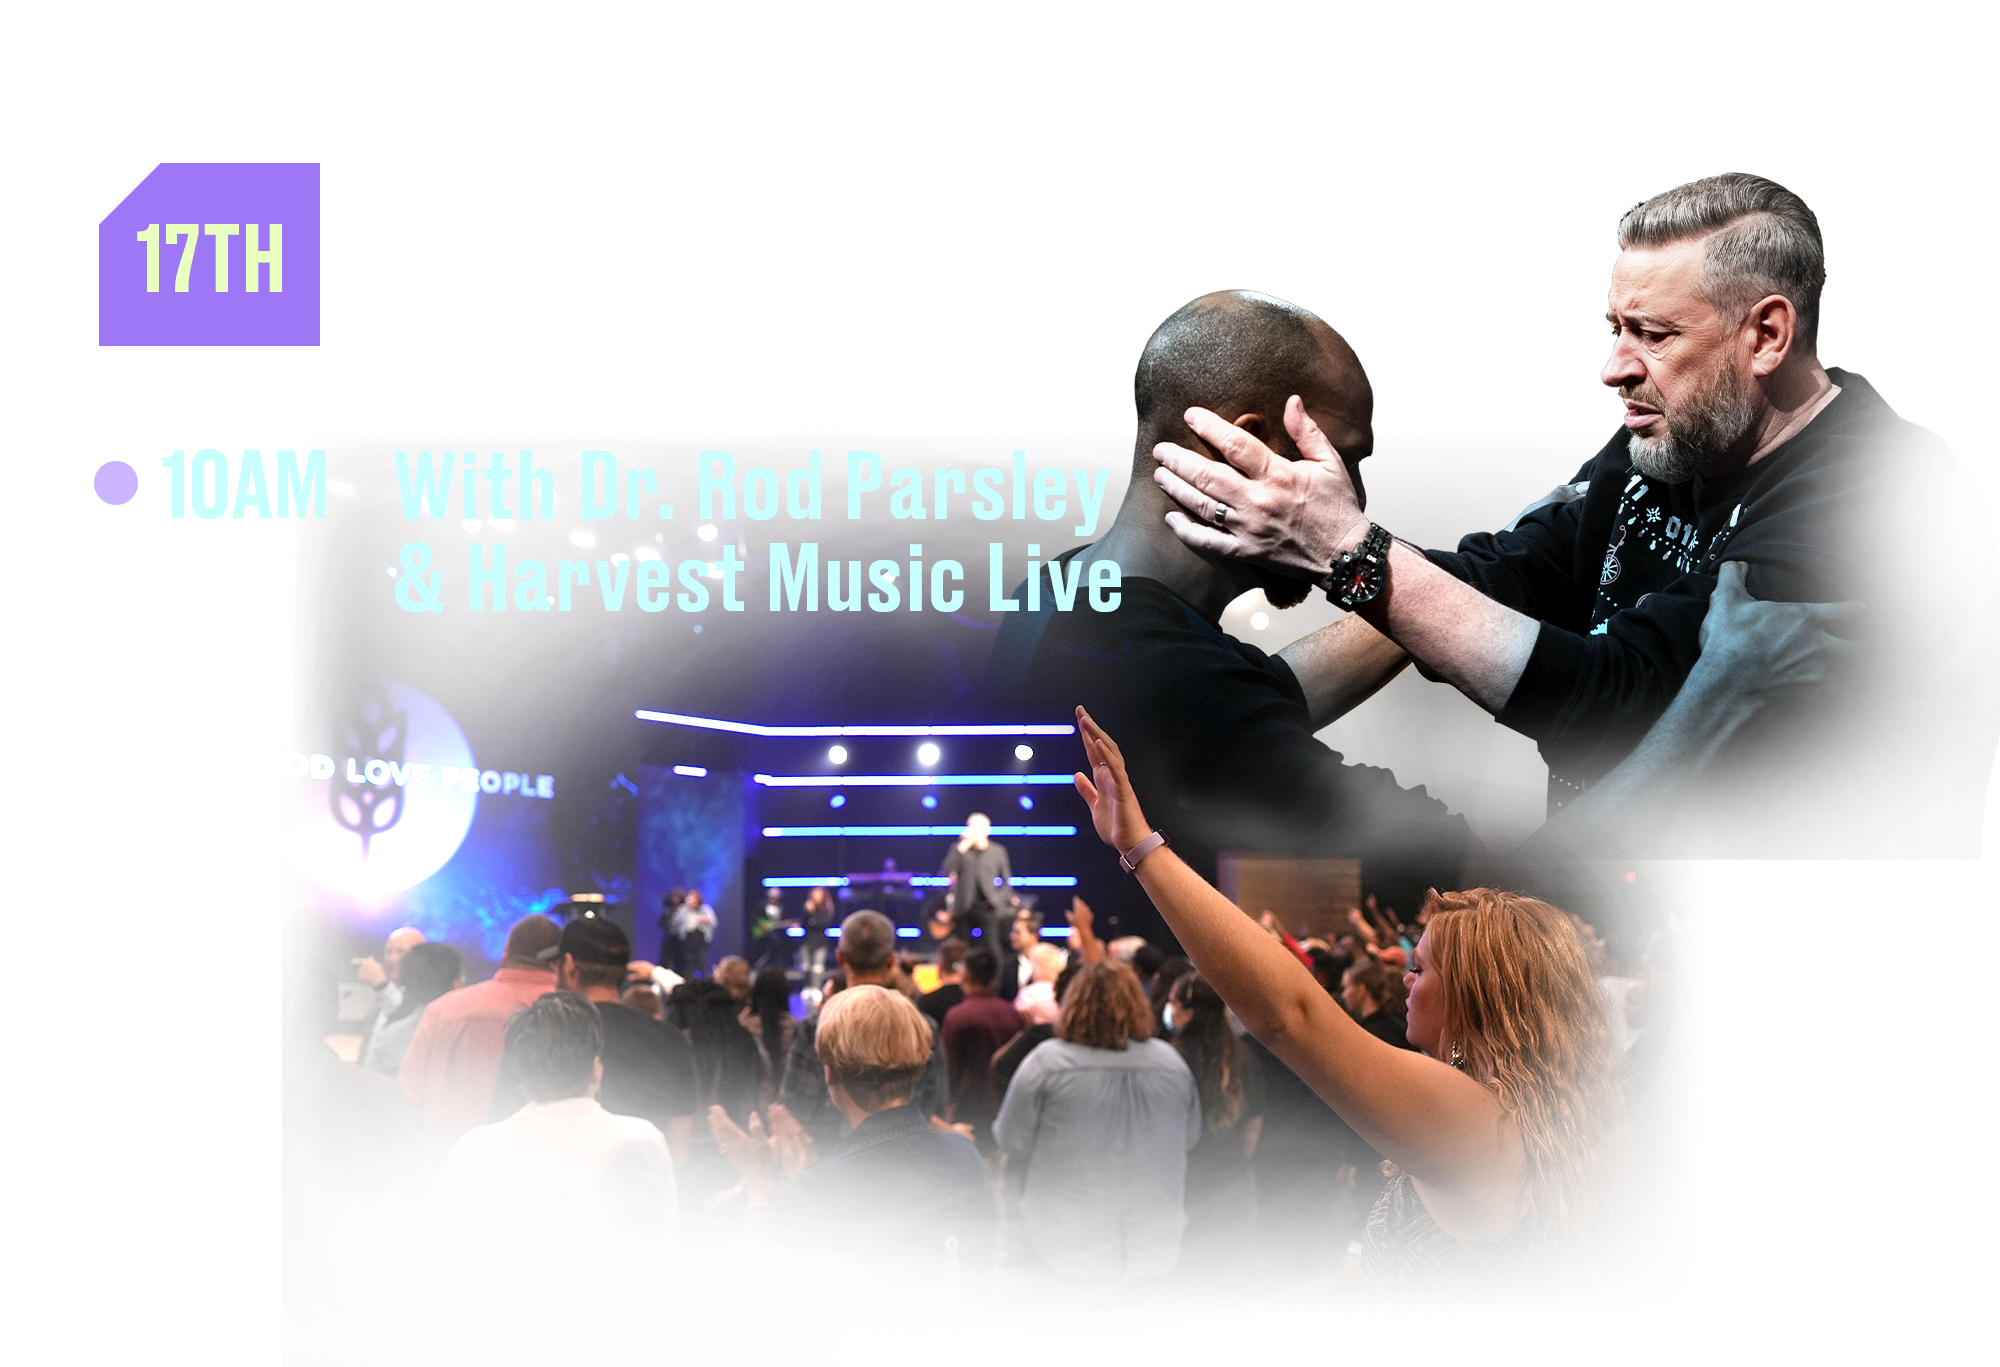 17th Outpouring Sundays 10AM With Dr. Rod Parsley and Harvest Music Live